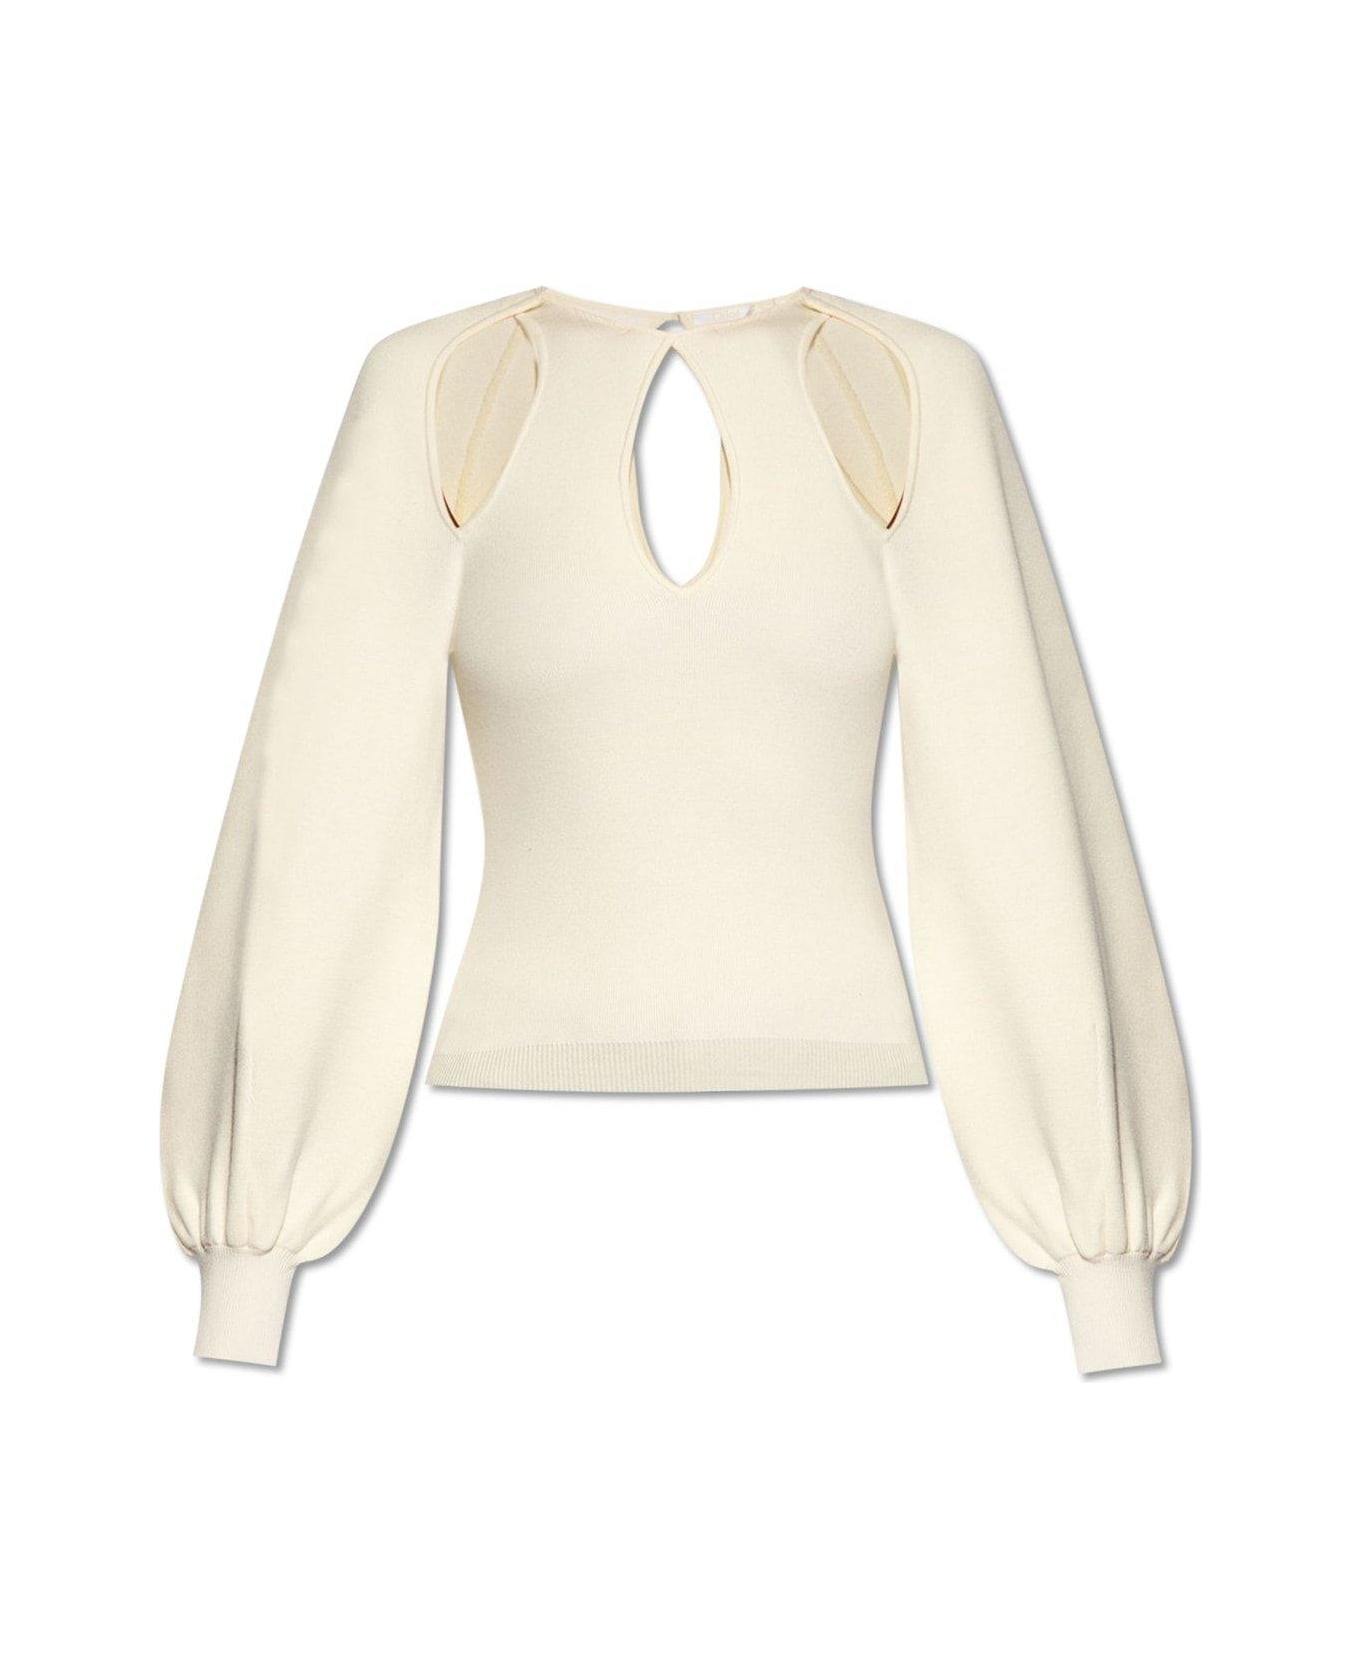 Chloé Puff-sleeved Cut-out Knit Top - Iconic milk